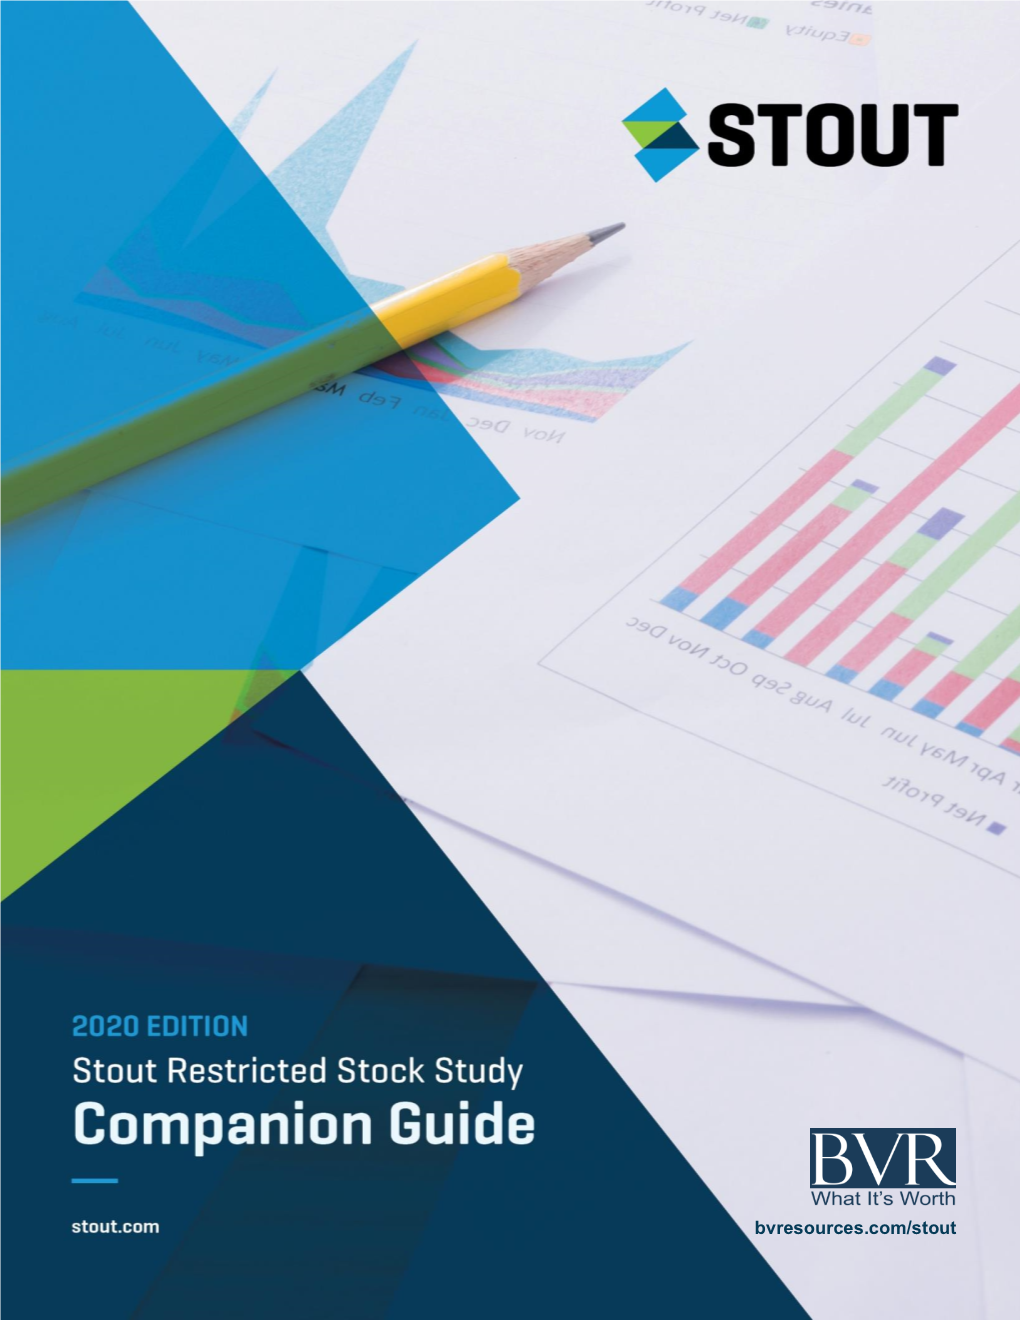 Companion Guide, Which Is Provided to Users of the Stout Restricted Stock Study™ At